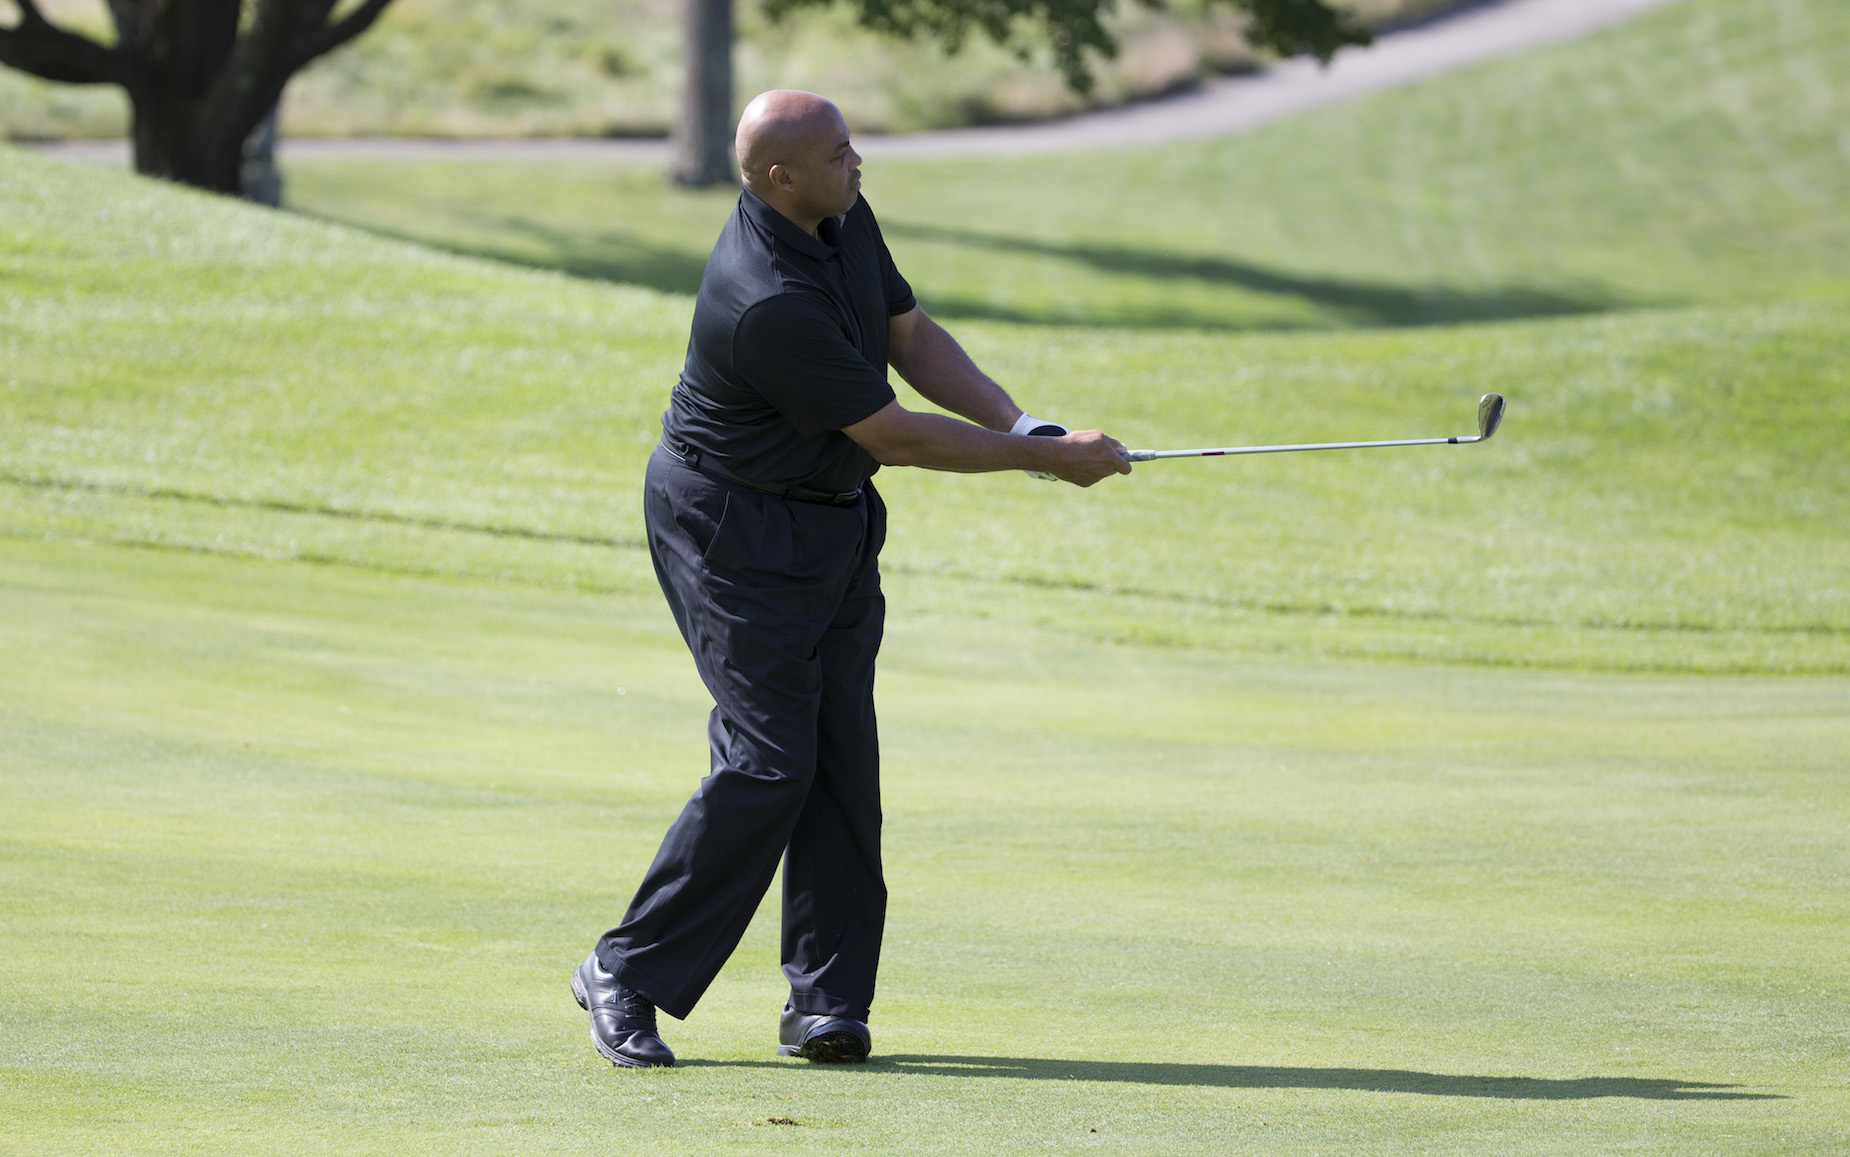 How did Charles Barkley end up with such an ugly golf swing?